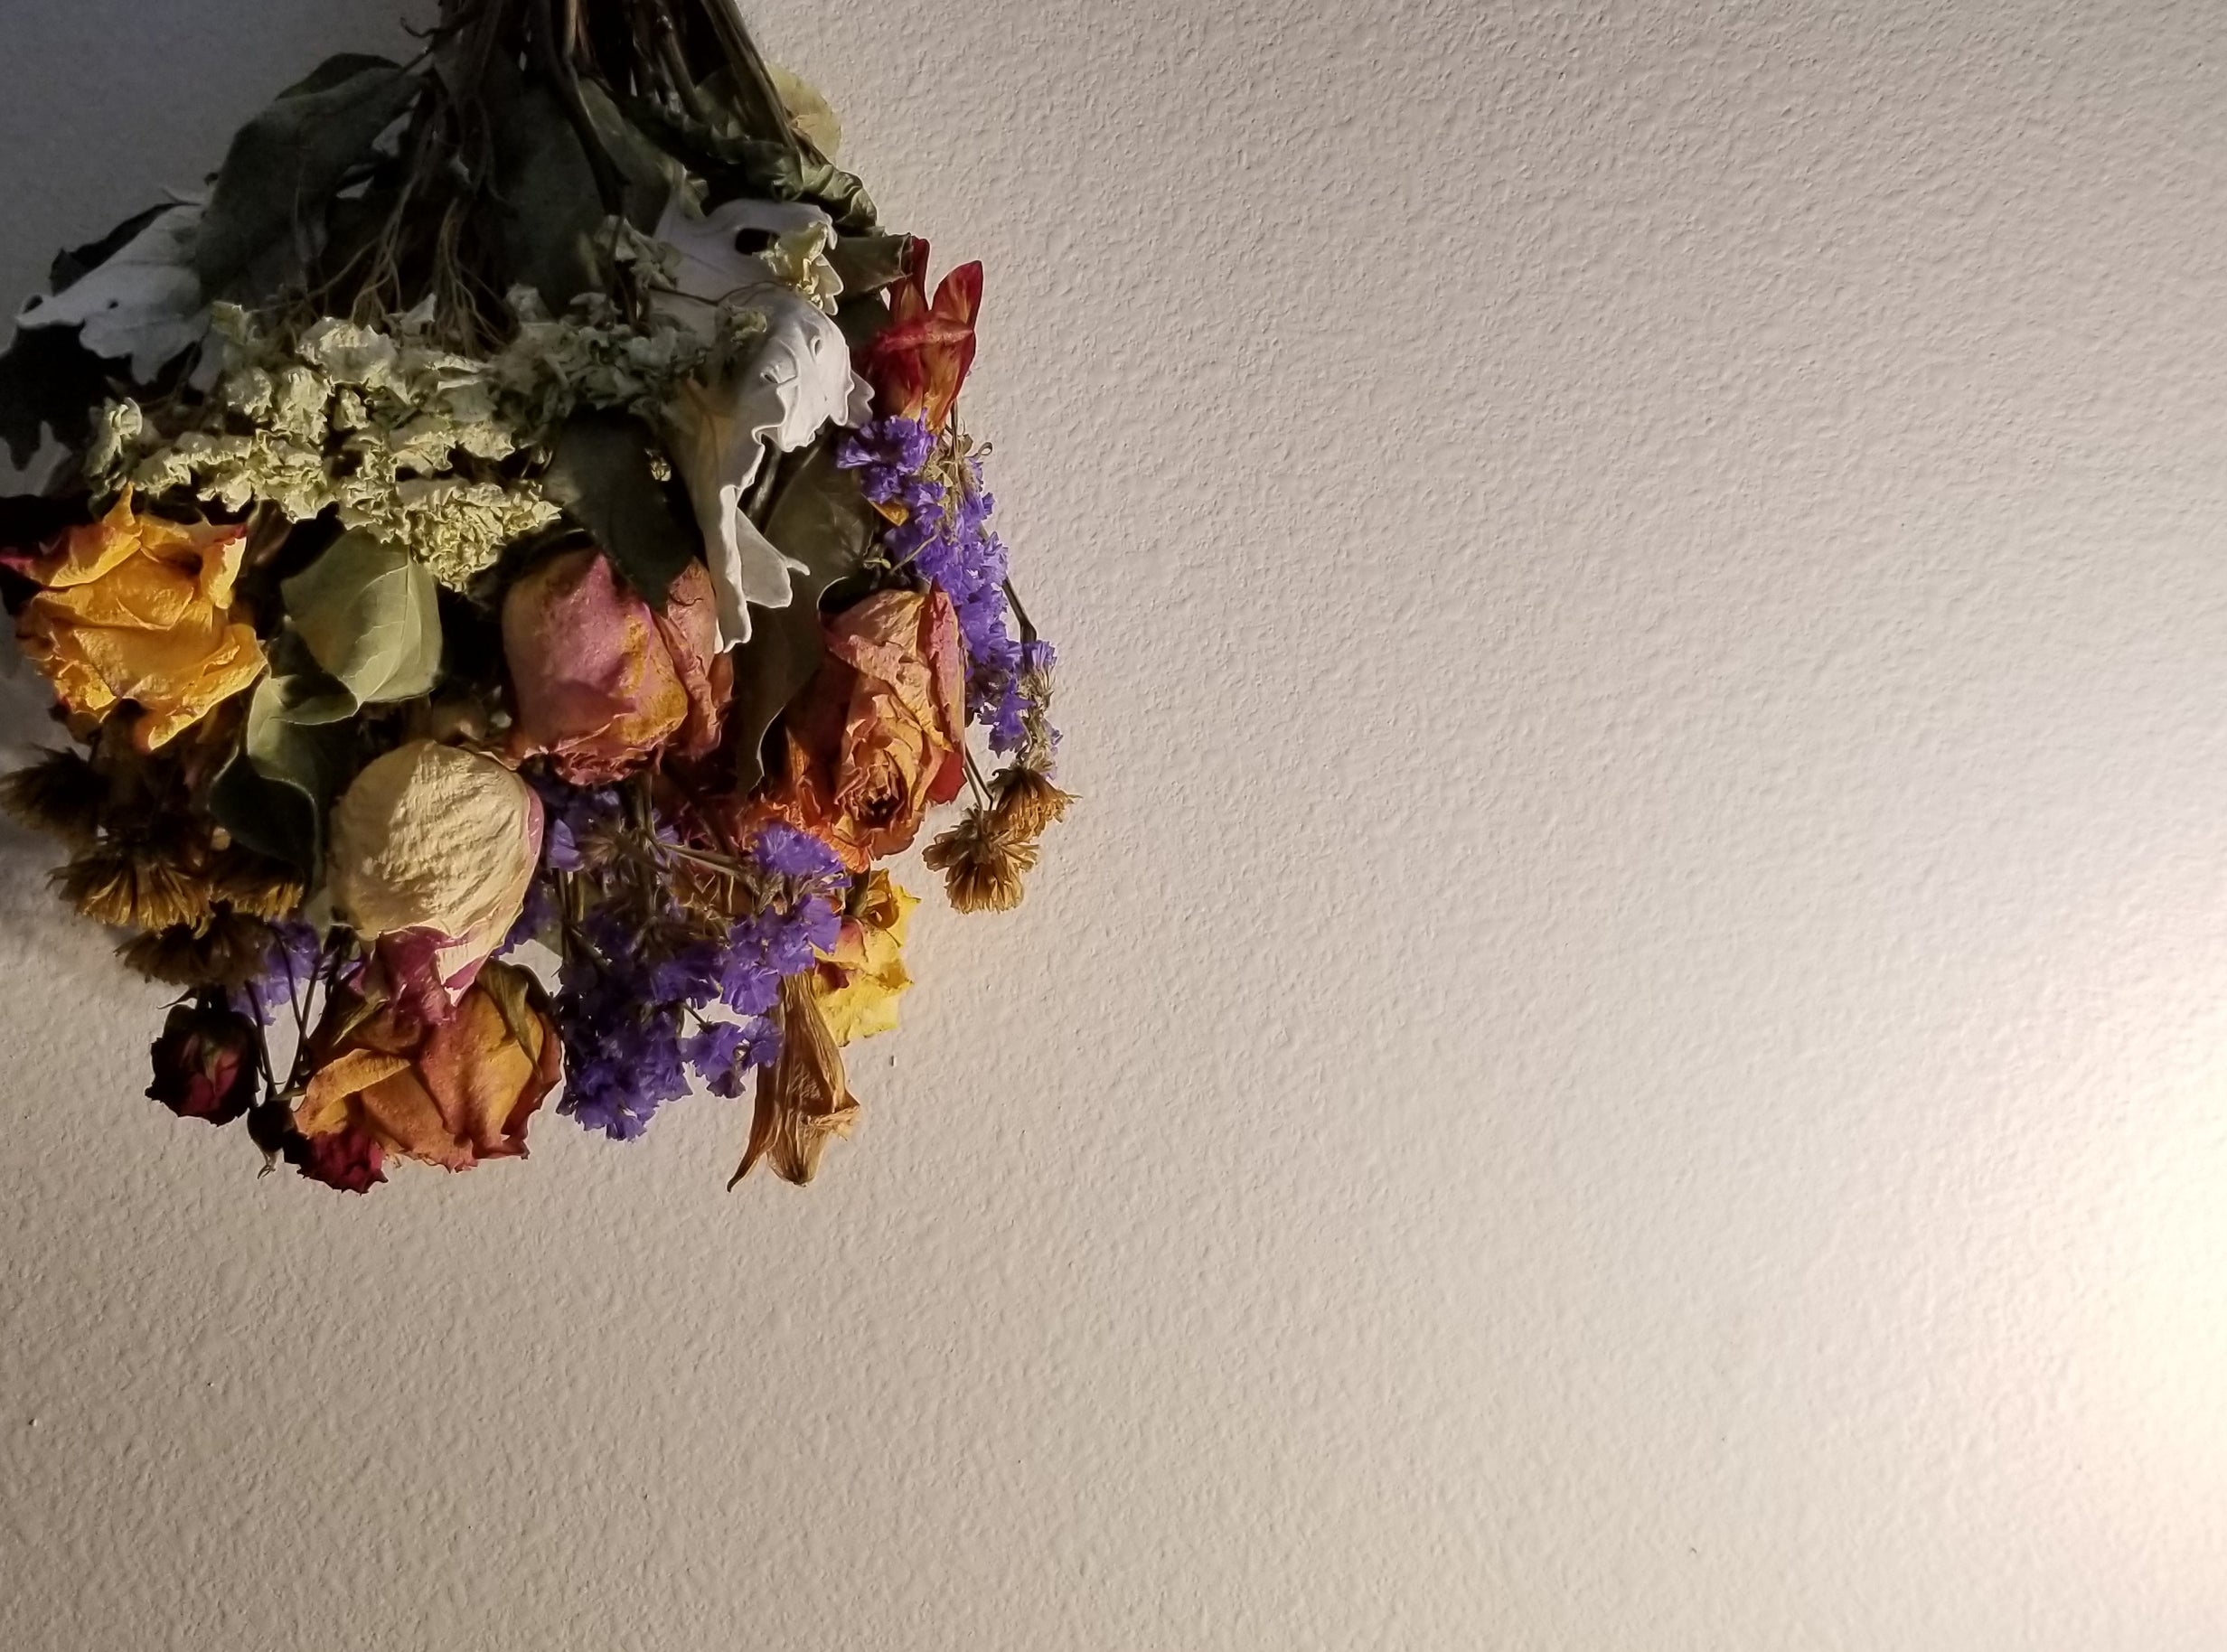 Bouquet of dried flowers hanging upside down against a plain wall with a light shining from the right